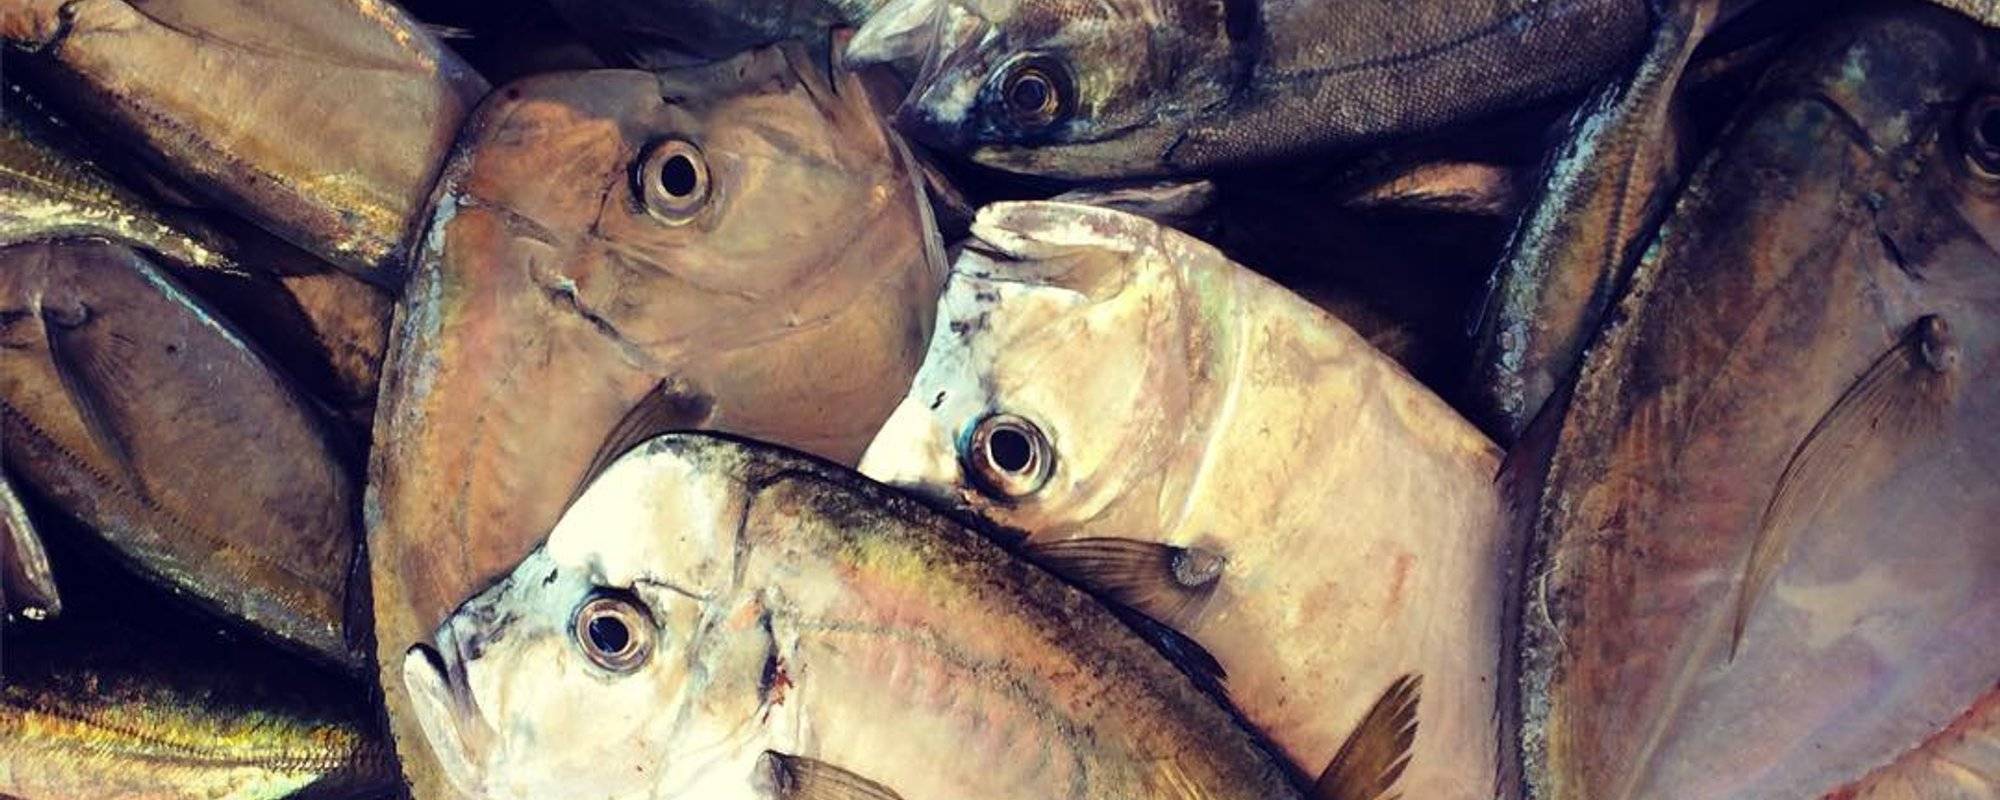 When fish take the stage | scenes of life in Mindelo, Cape Verde